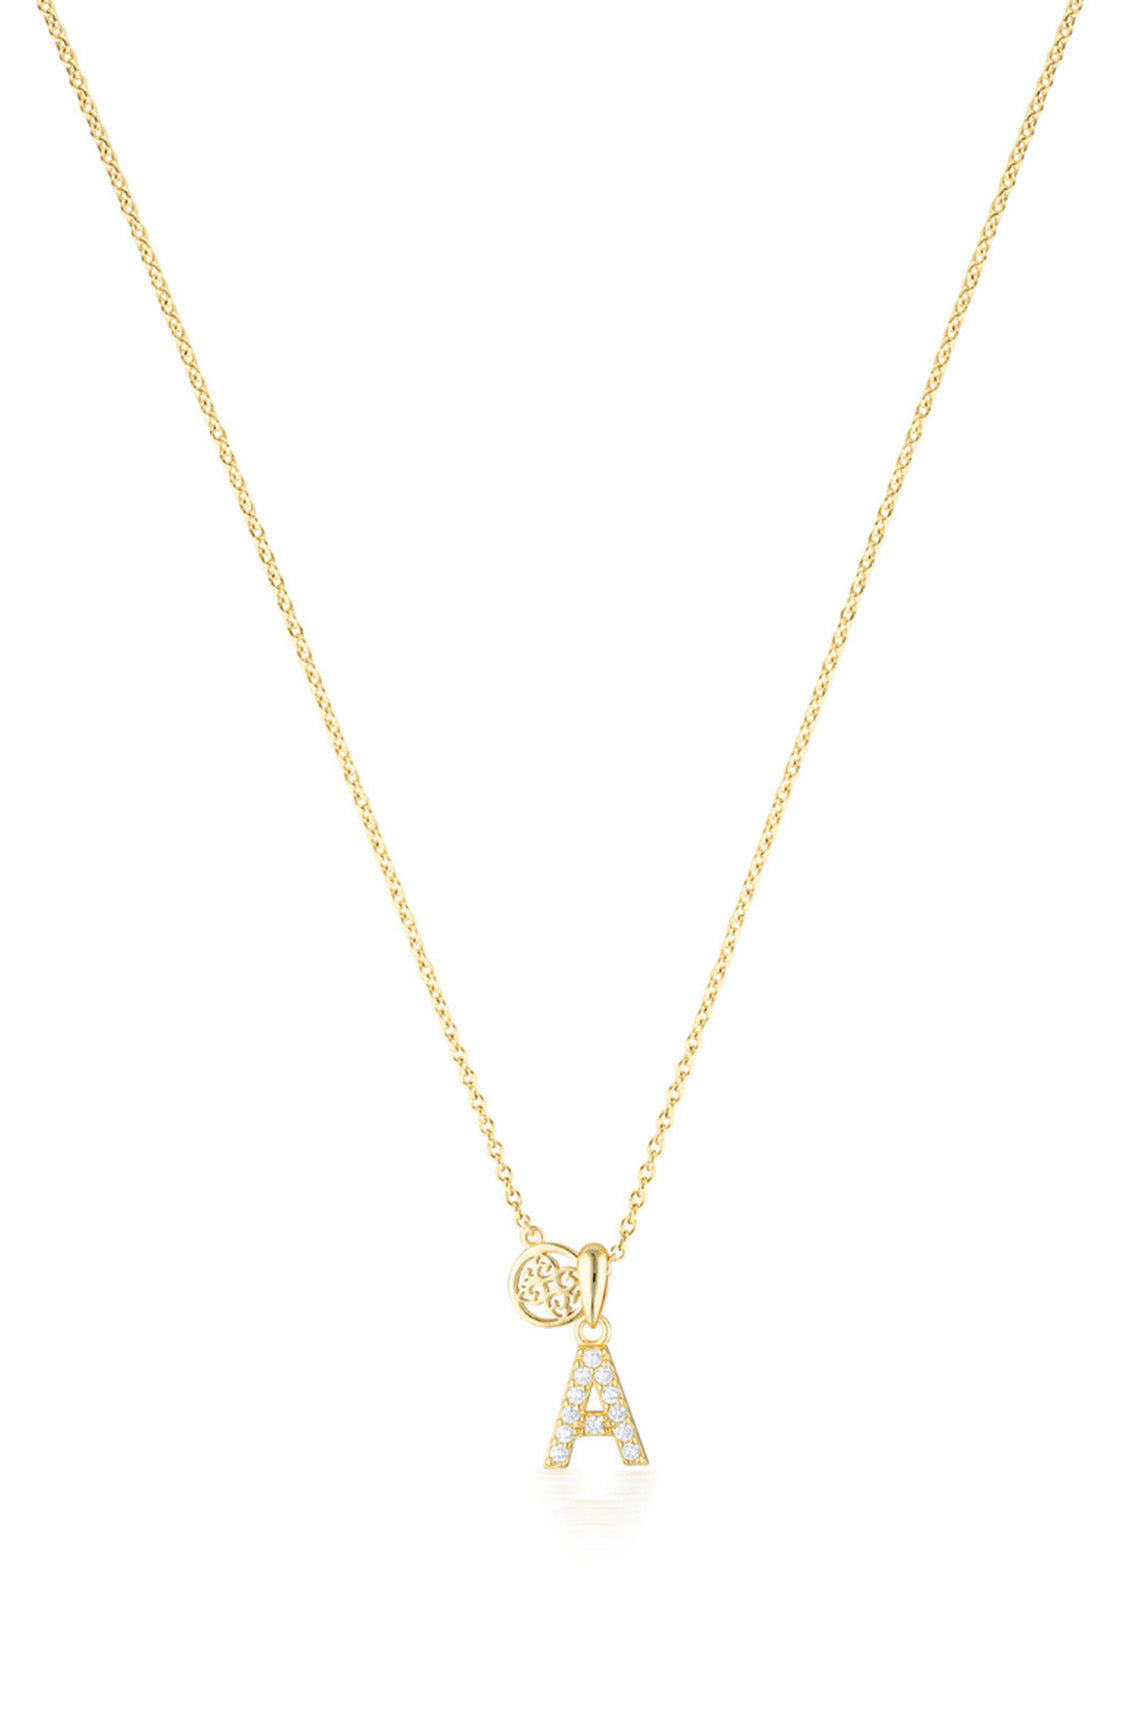 LUXURY LETTERS A INITIAL PENDANT GOLD